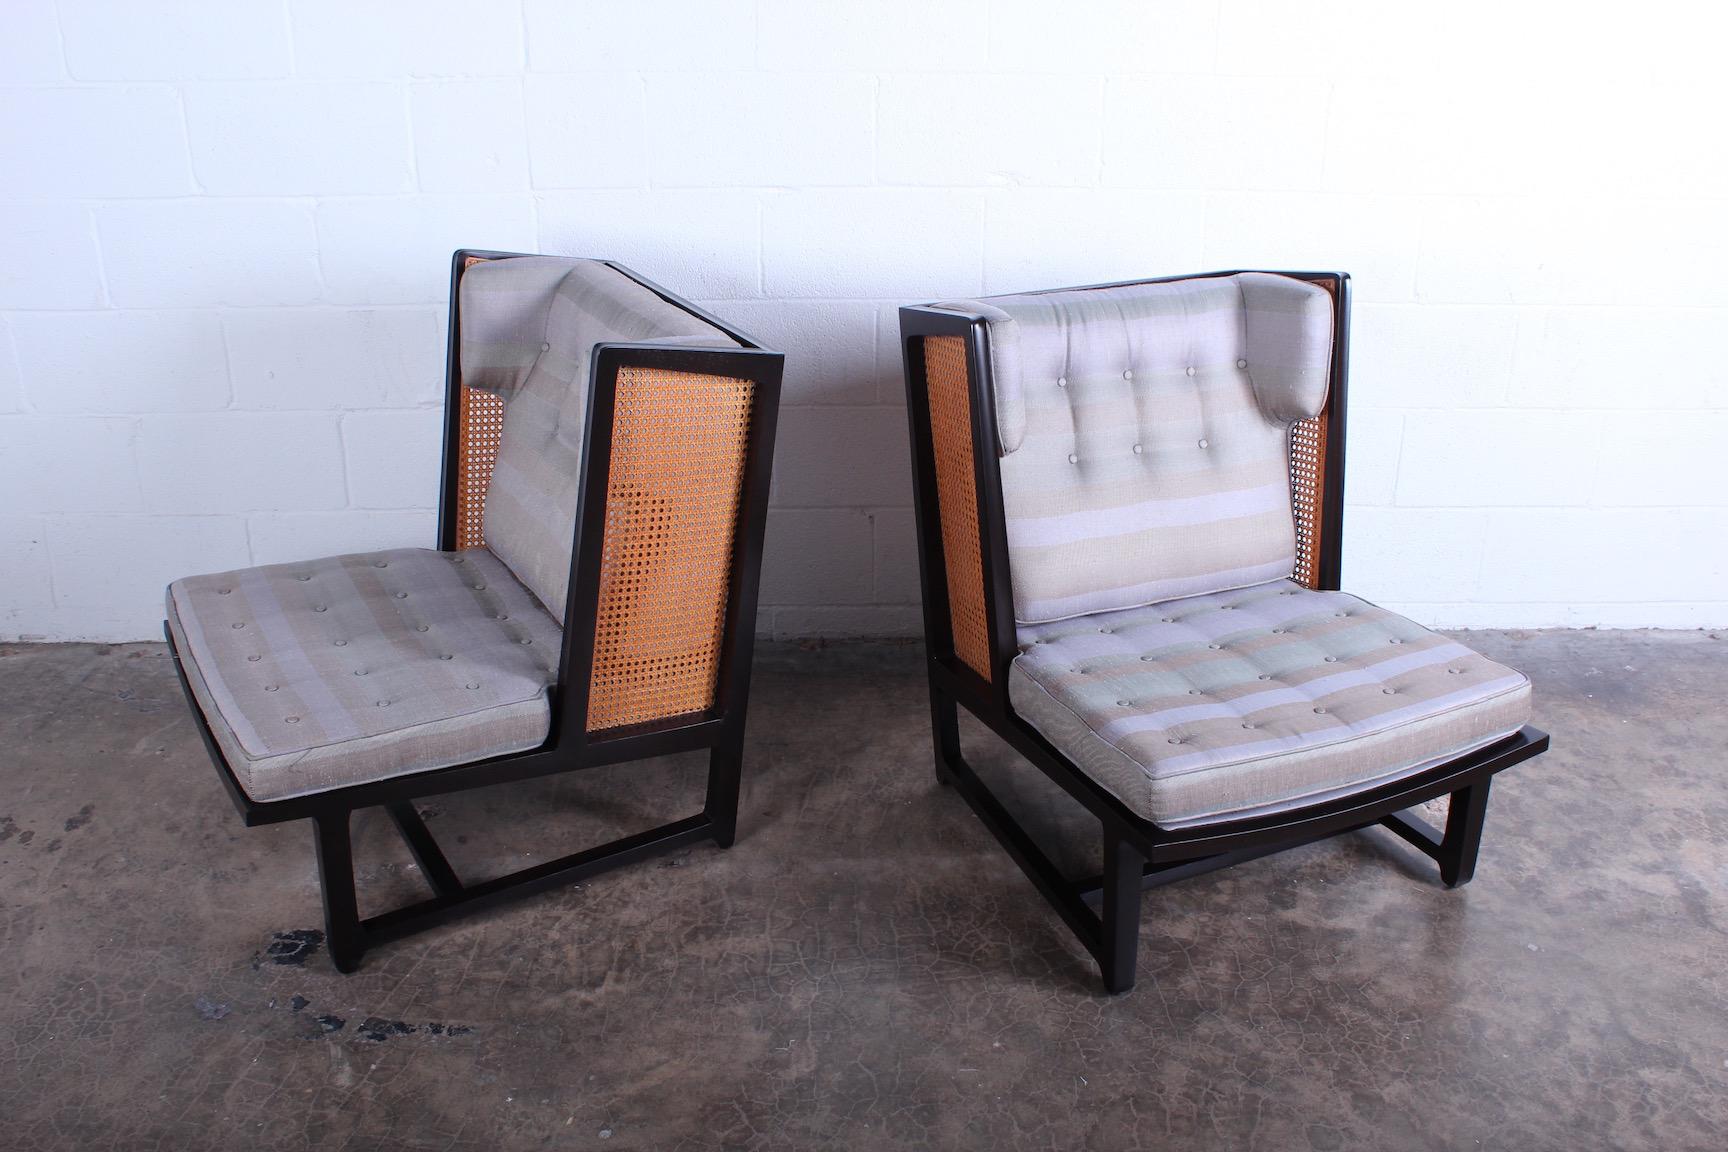 A rare pair of cane back wing chairs model 6016 designed by Edward Wormley for Dunbar, 1960.